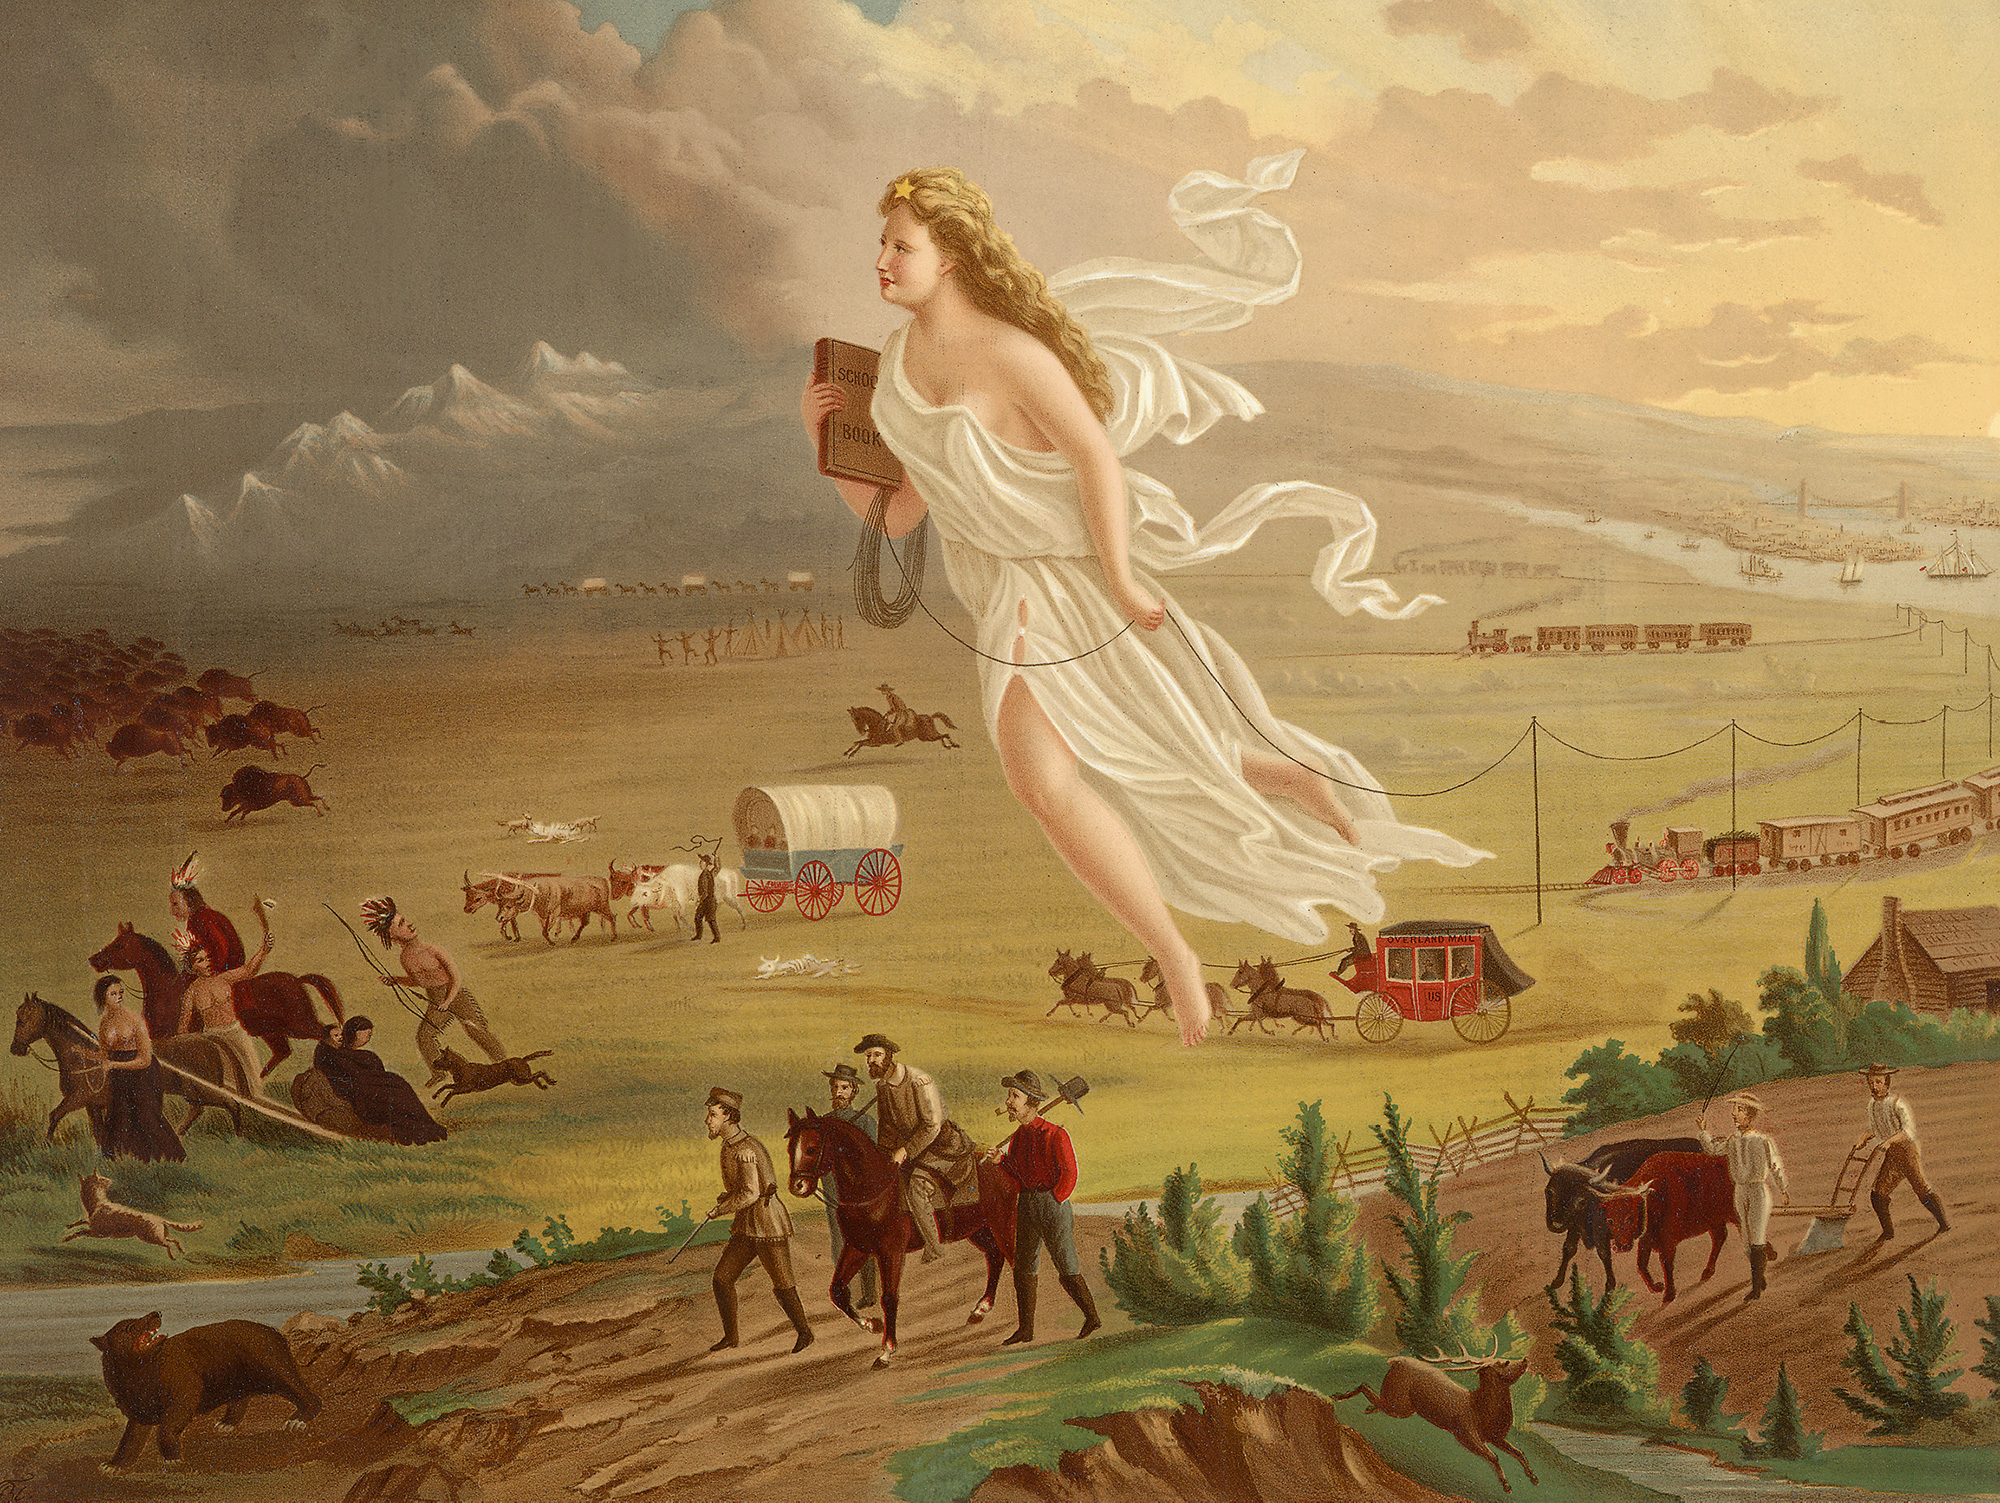 Chromolithograph by George A. Crofutt, after John Gast’s 1872 painting American Progress. Columbia, the personification of the United States, leads the way by stringing telegraph wire as she sweeps west. Courtesy Library of Congress.